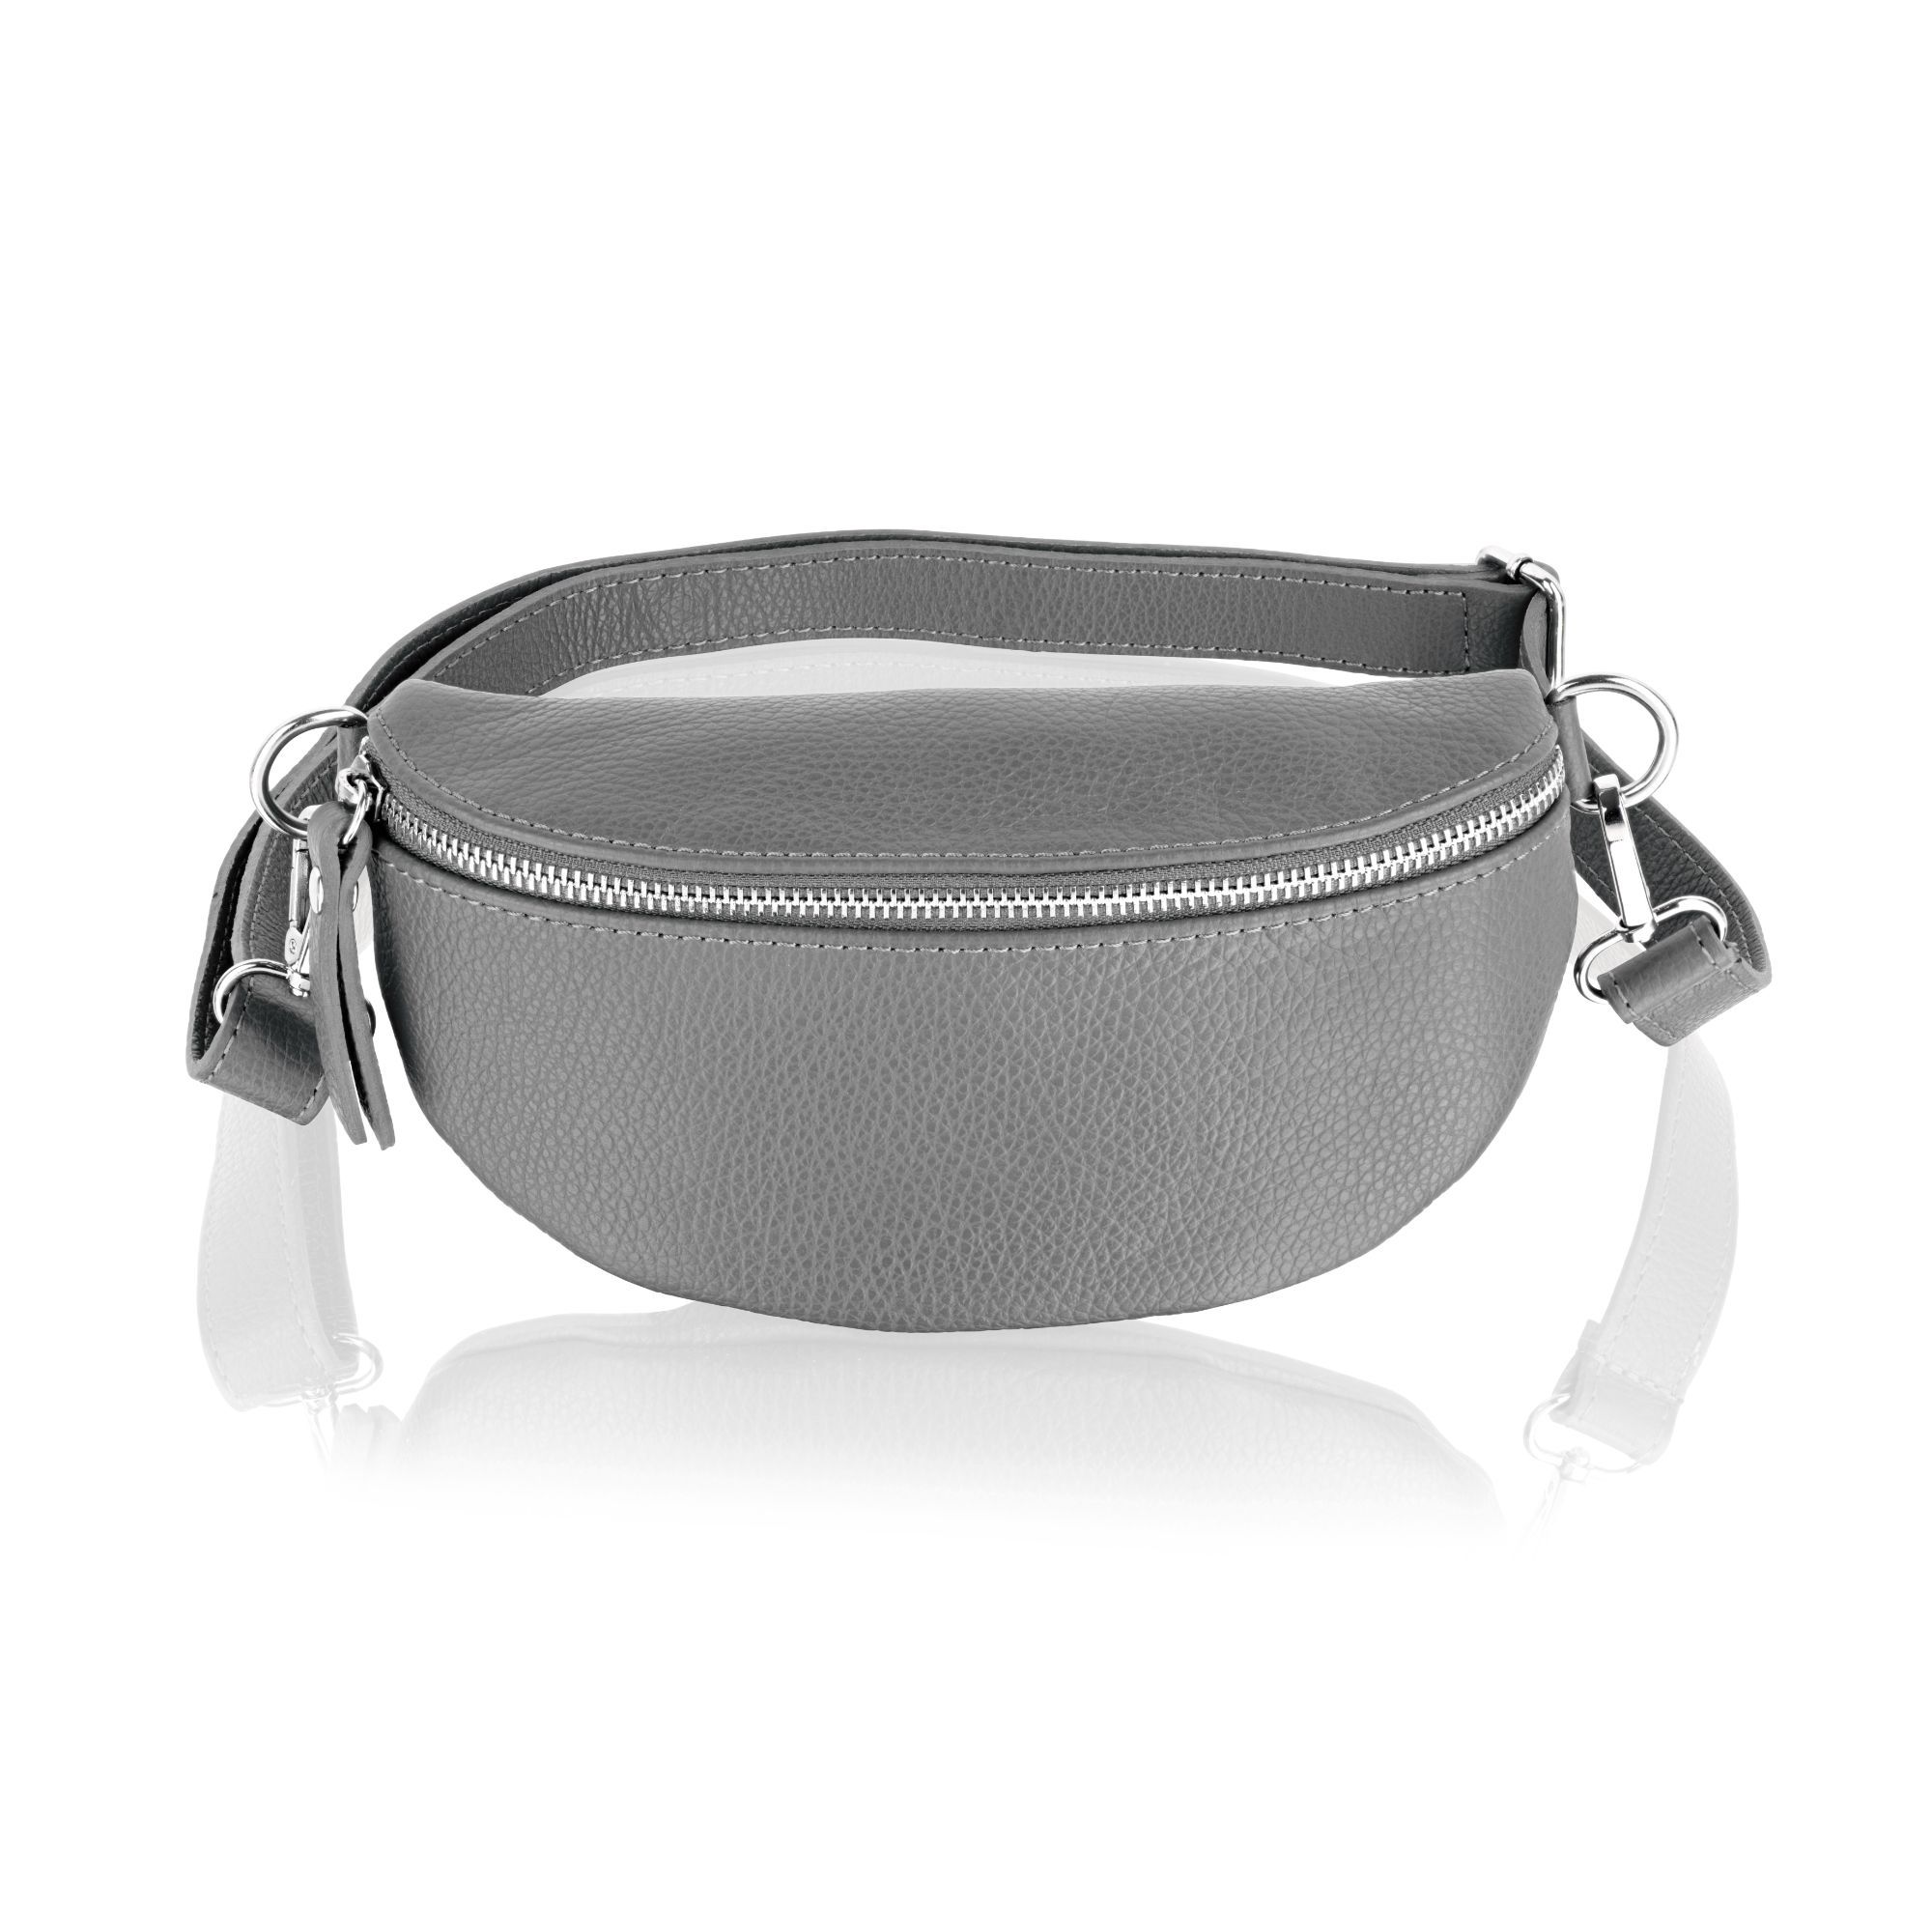 MADE IN ITALY - This is a small but stylish genuine leather waist bag and is very simplistic in design and look. The bag is accessed via a metal silver zip and once inside there are 2 sections: one to accommodate cards and cash and the other one is to put the other necessities. There are 2 closed silver buckles on either side of the bag which can attach to an adjustable strap with key ring style hooks on either side of the shoulder strap. The leather is smooth and of high quality being made in Italy.